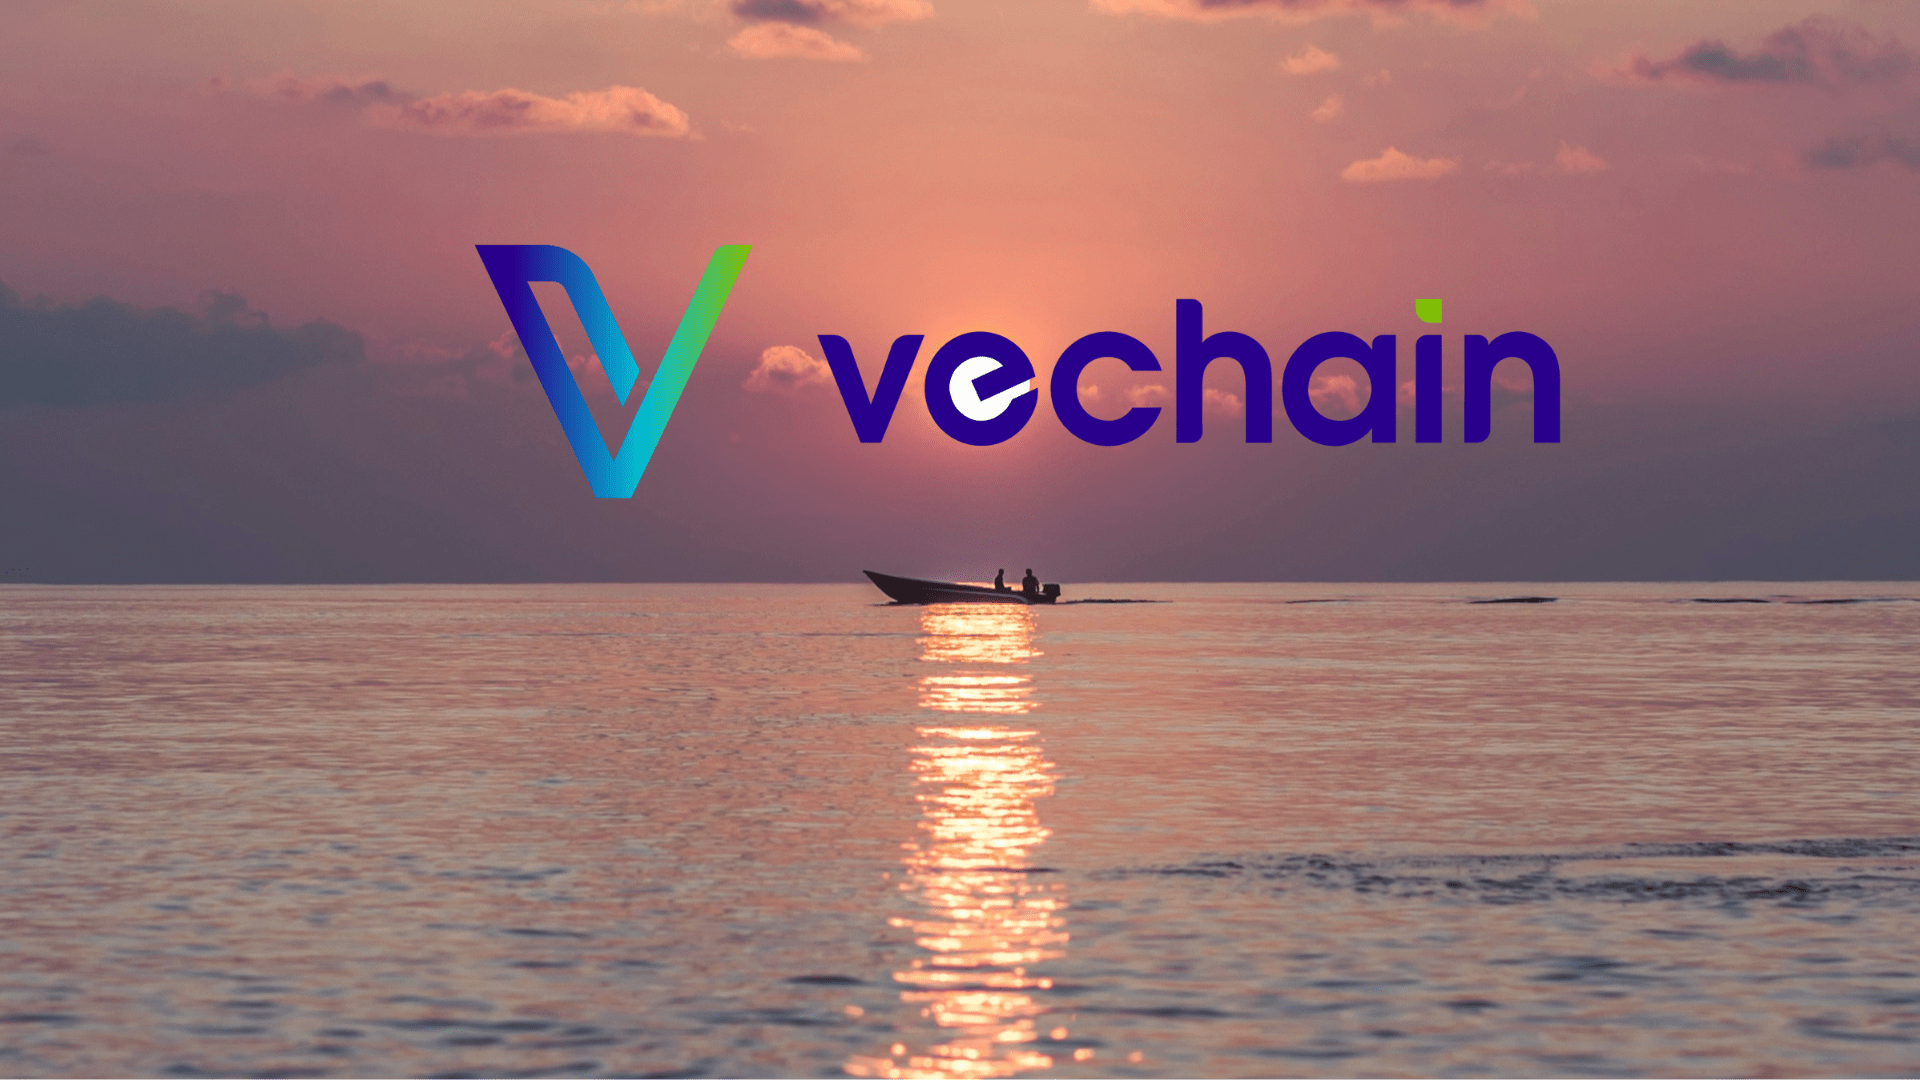 VeChain (VET) Forecast: Is This the Calm Before a Price Rally?